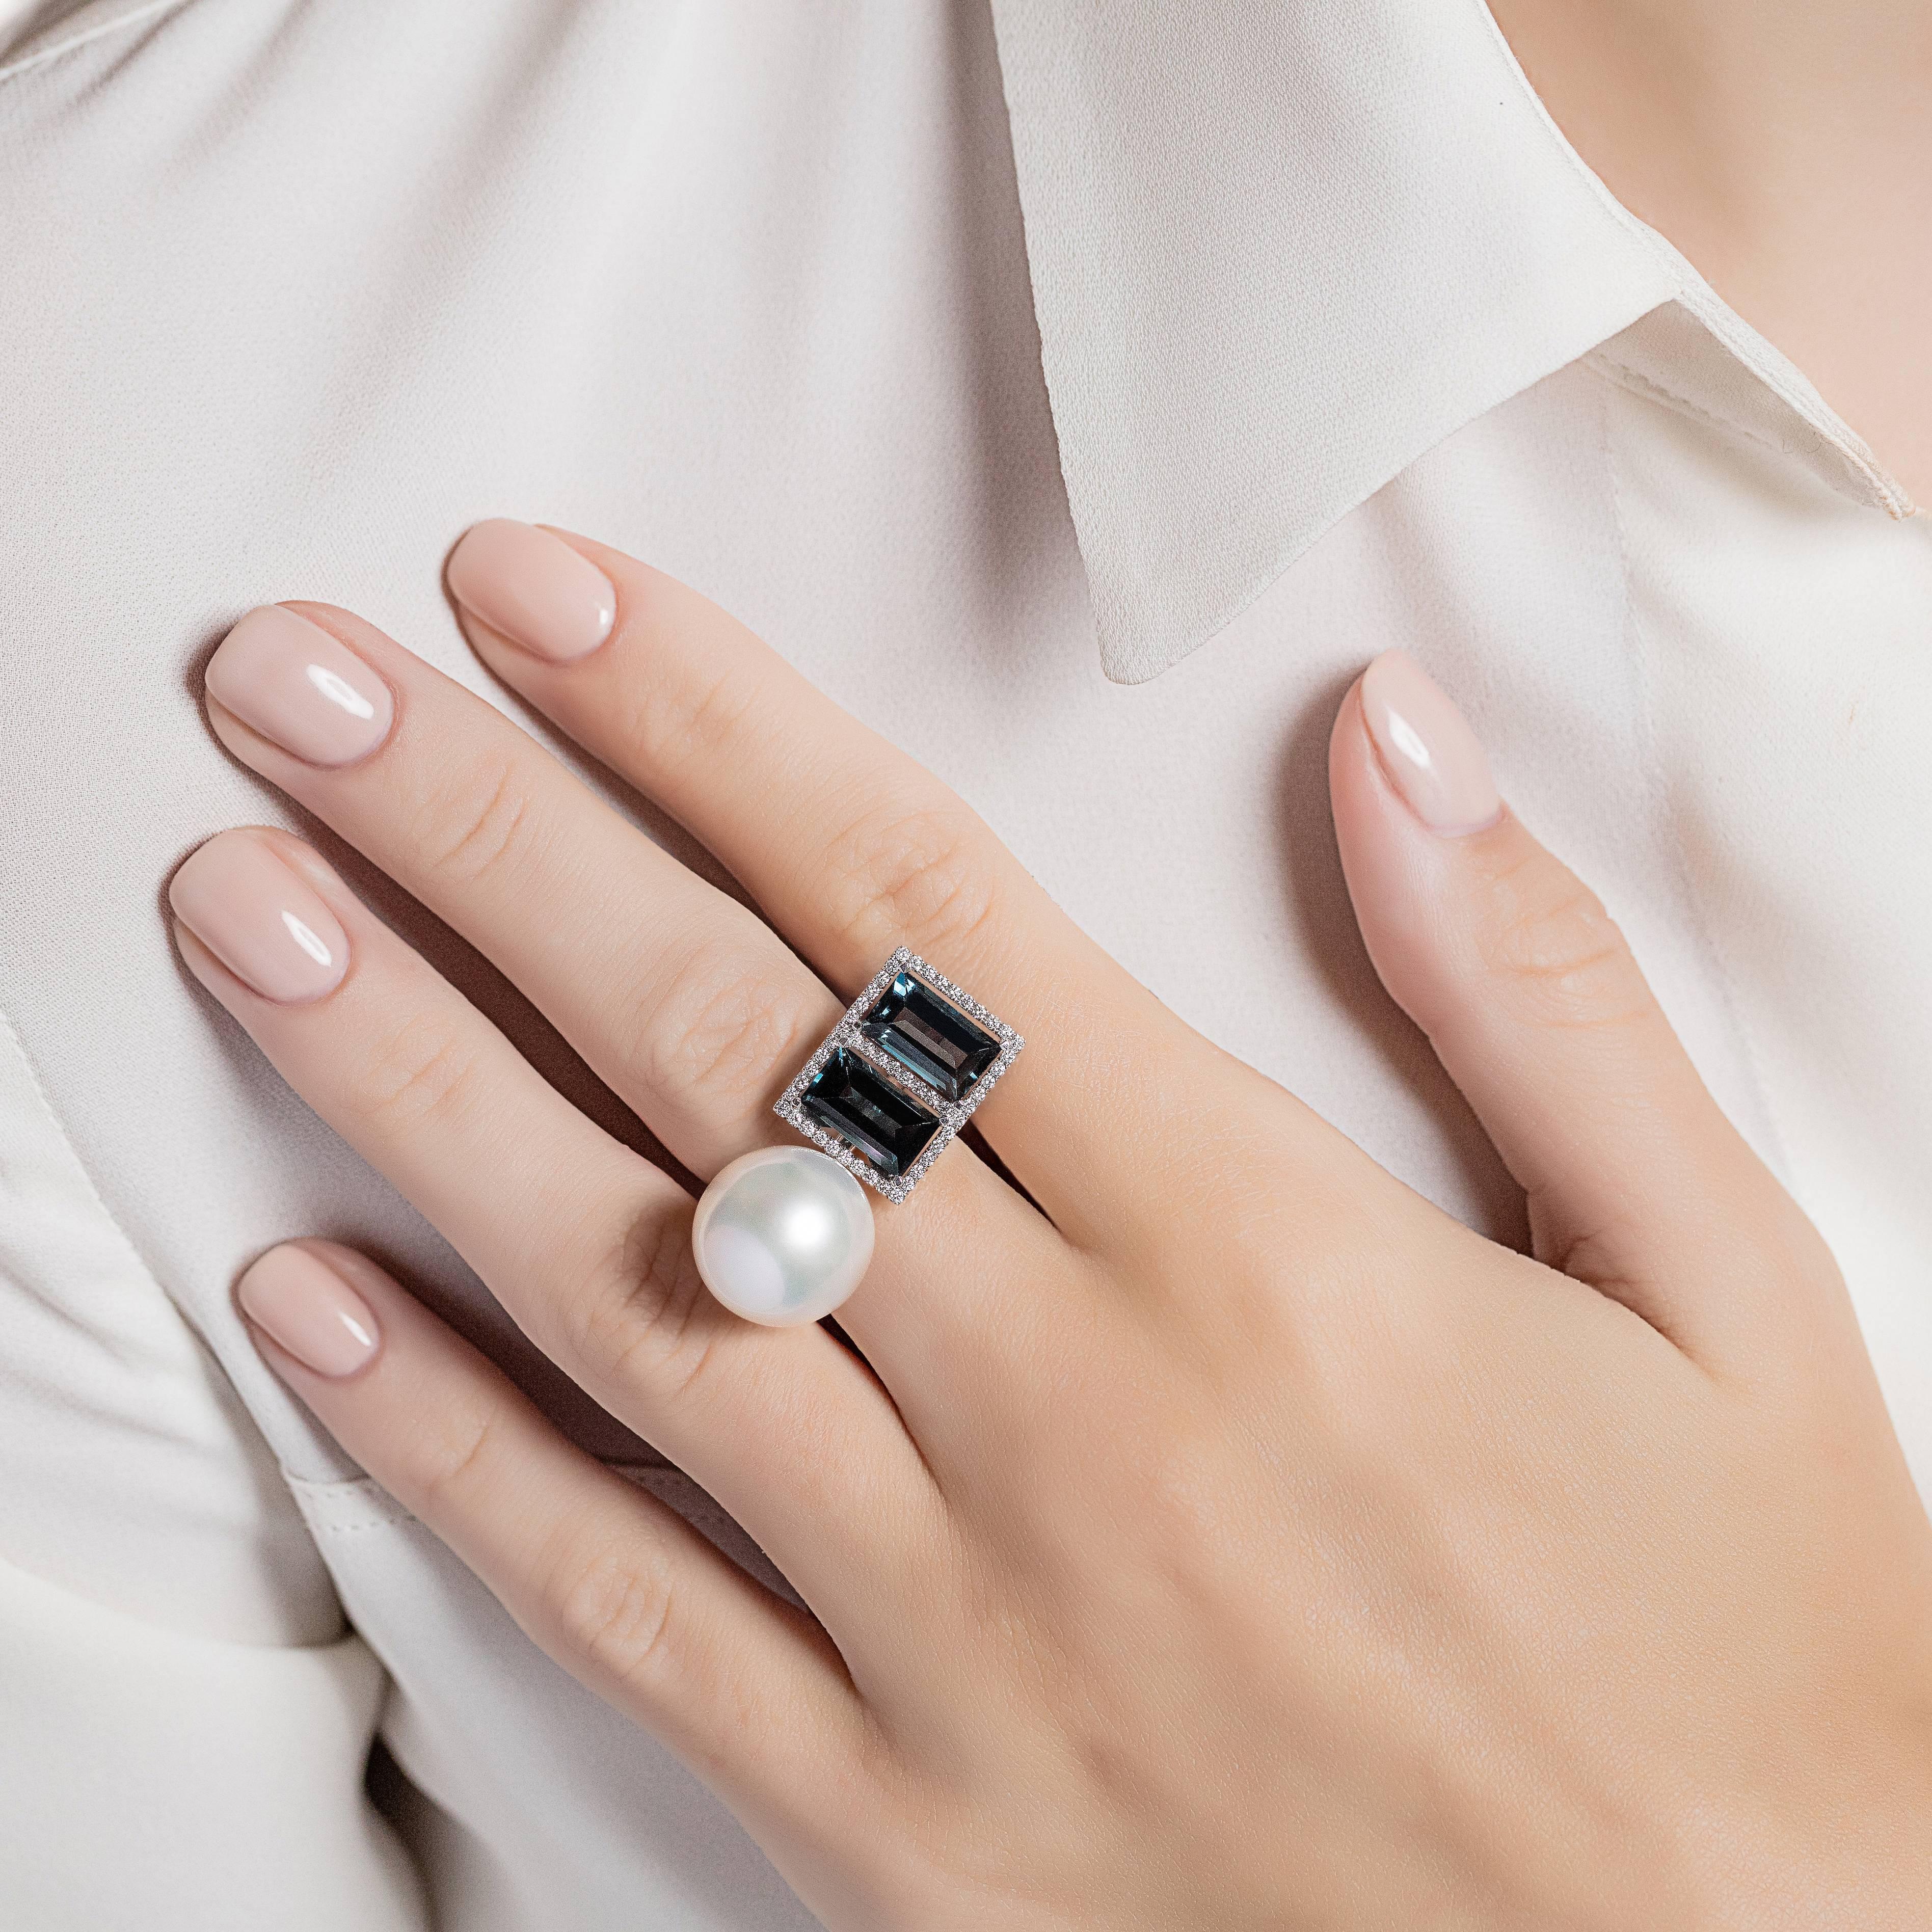 A striking ring, with double baguette-cut amethyst and a South Sea Pearl, each surrounded with diamonds. The Elle et Lui collection symbolises the interaction of extremes – men and woman – which formed the basis for the concept of yin and yang.